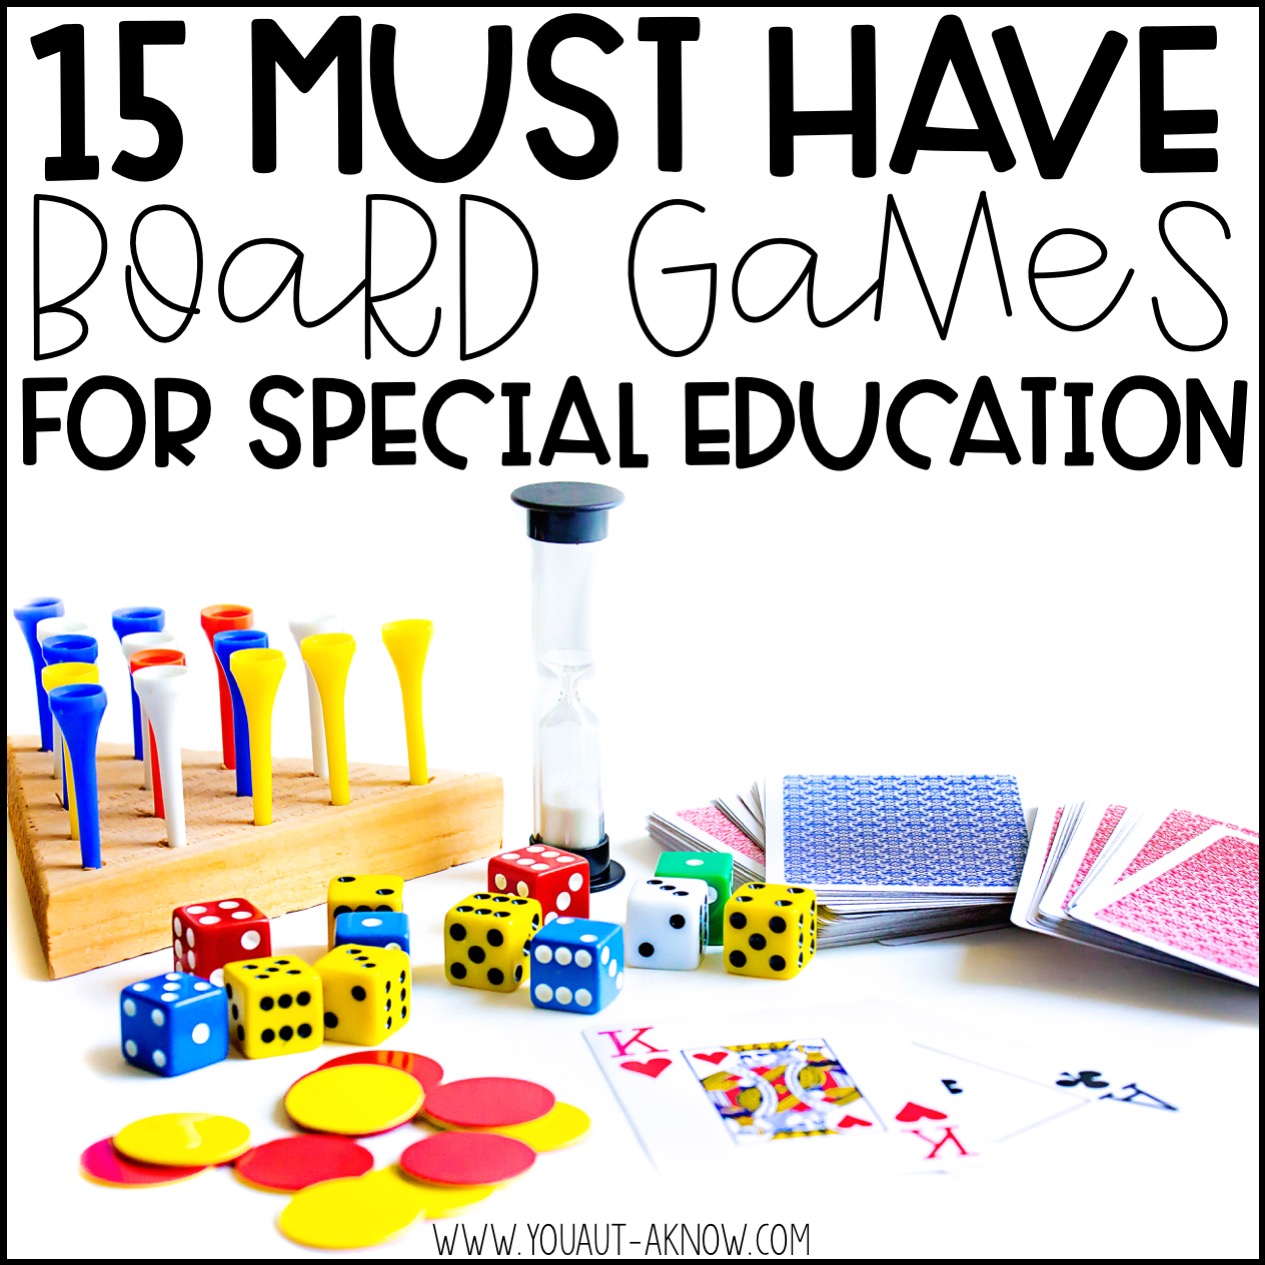 15-must-have-board-games-for-special-education-you-aut-a-know